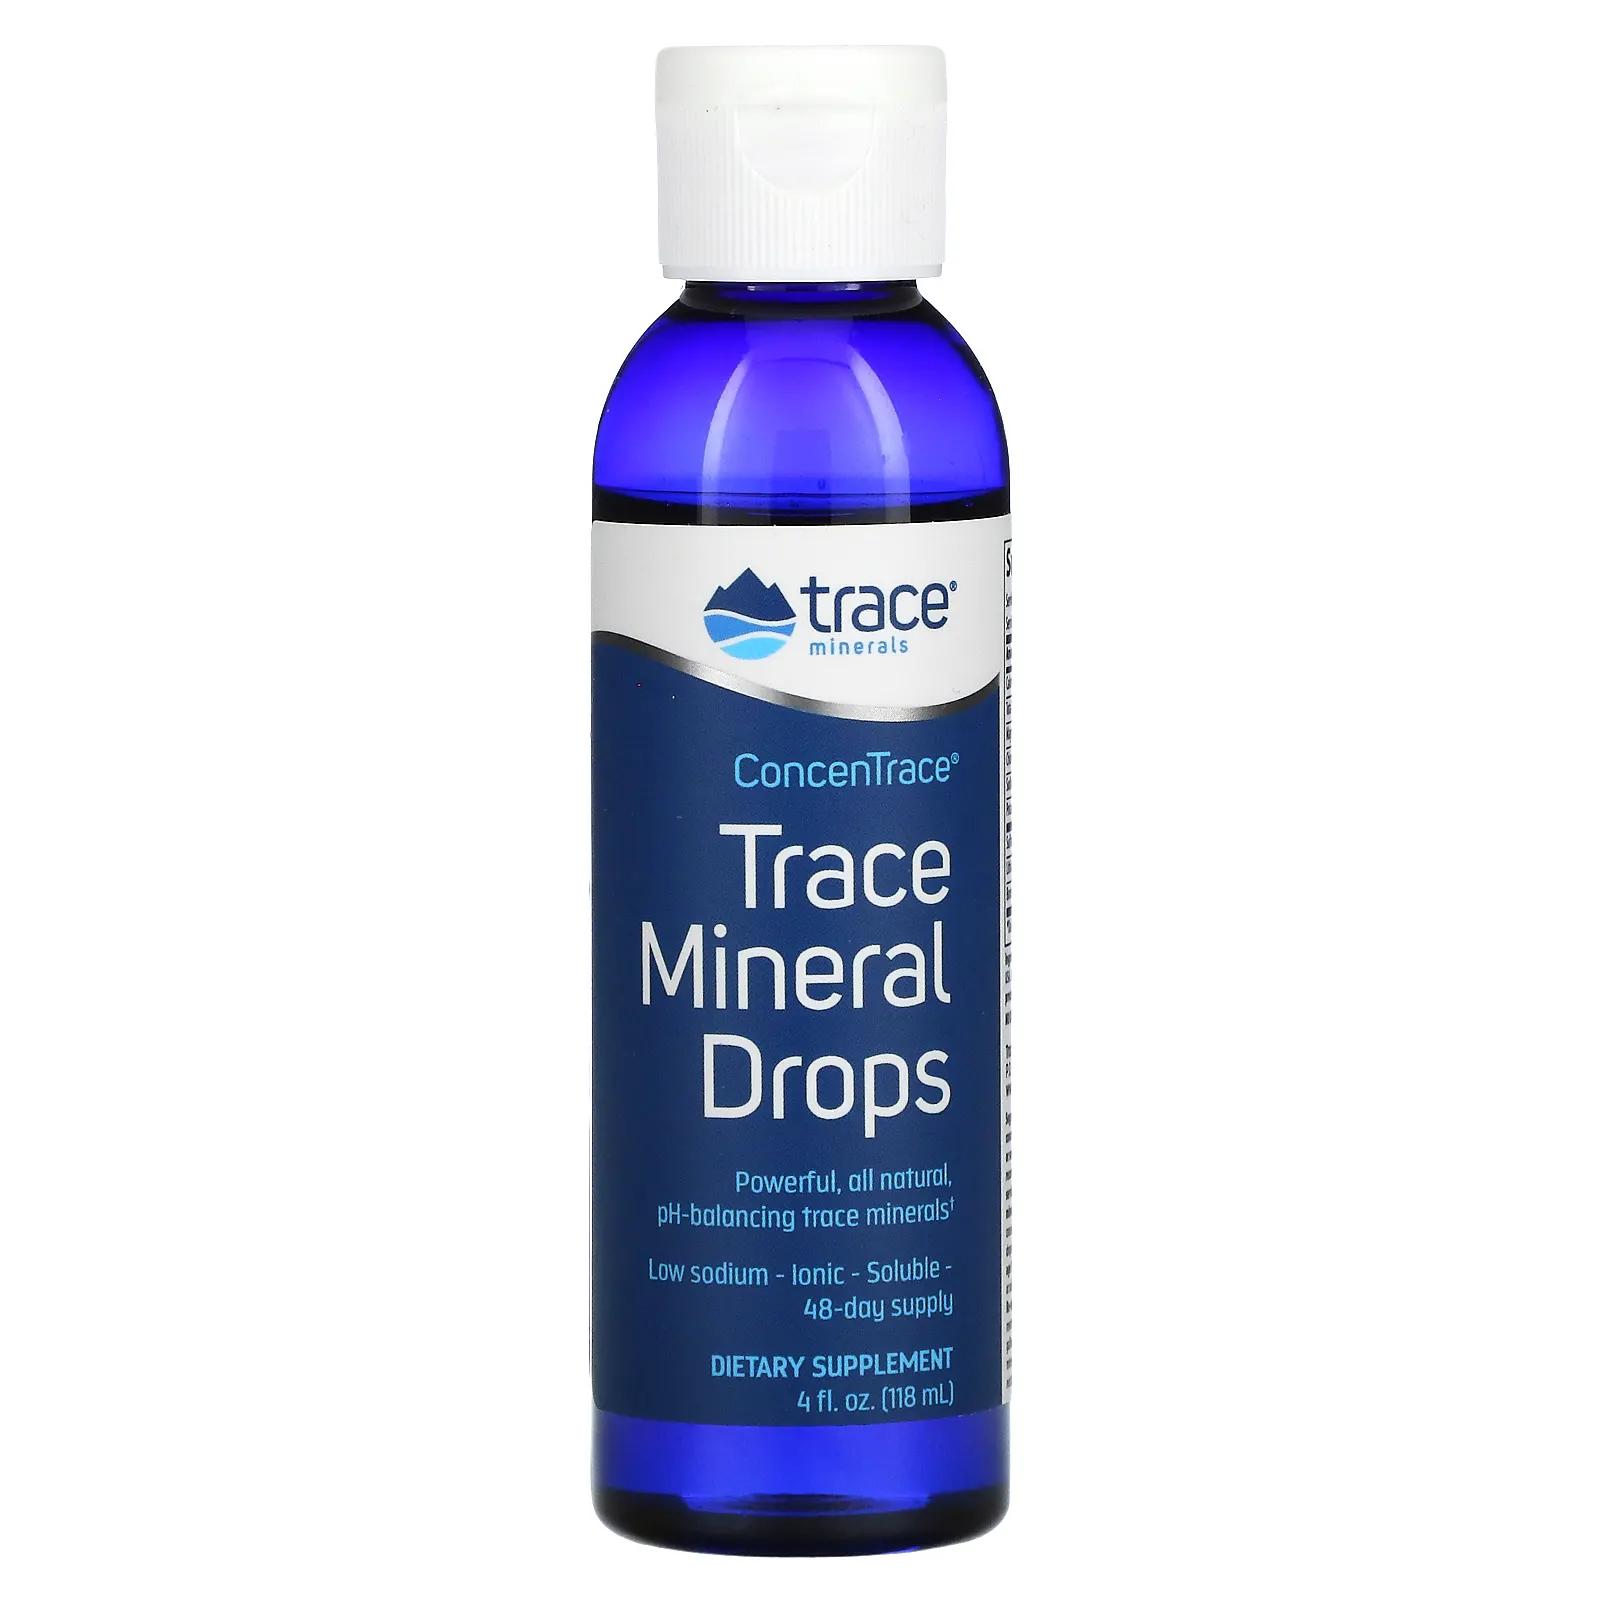 Trace Minerals Research ConcenTrace капли с микроэлементами 118 мл trace minerals concentrace таблетки с минералами и микроэлементами 300 таблеток